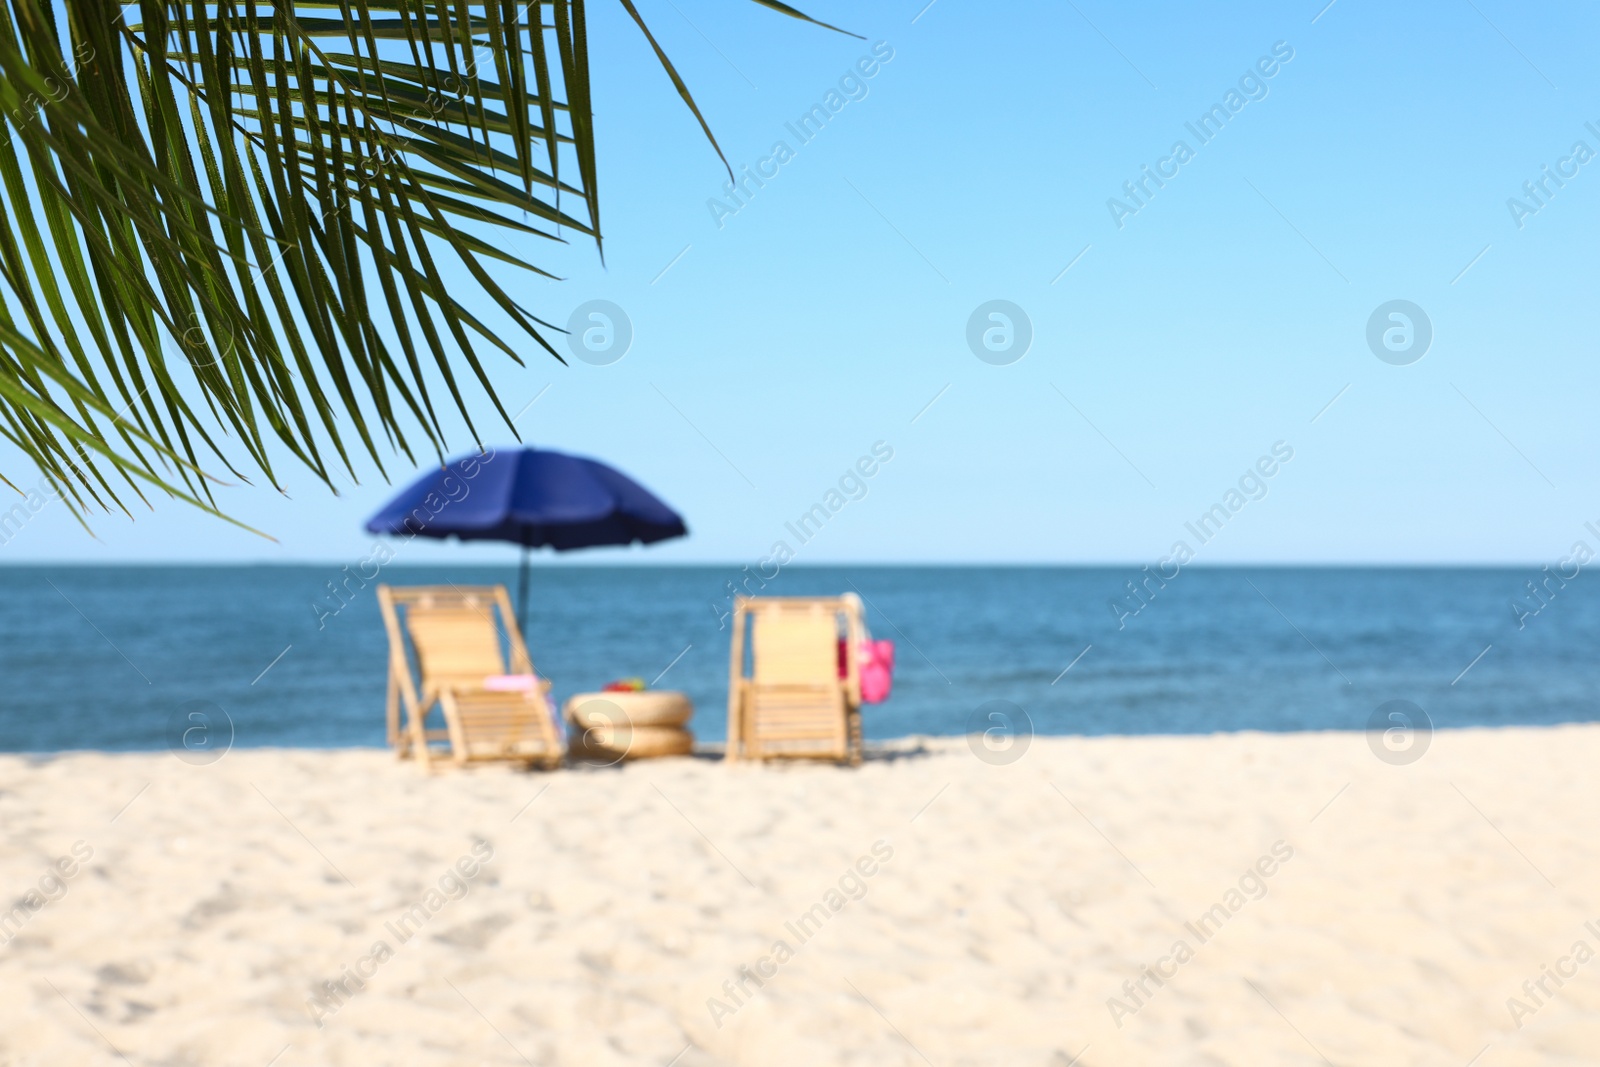 Photo of Wooden sunbeds and beach accessories on sandy shore